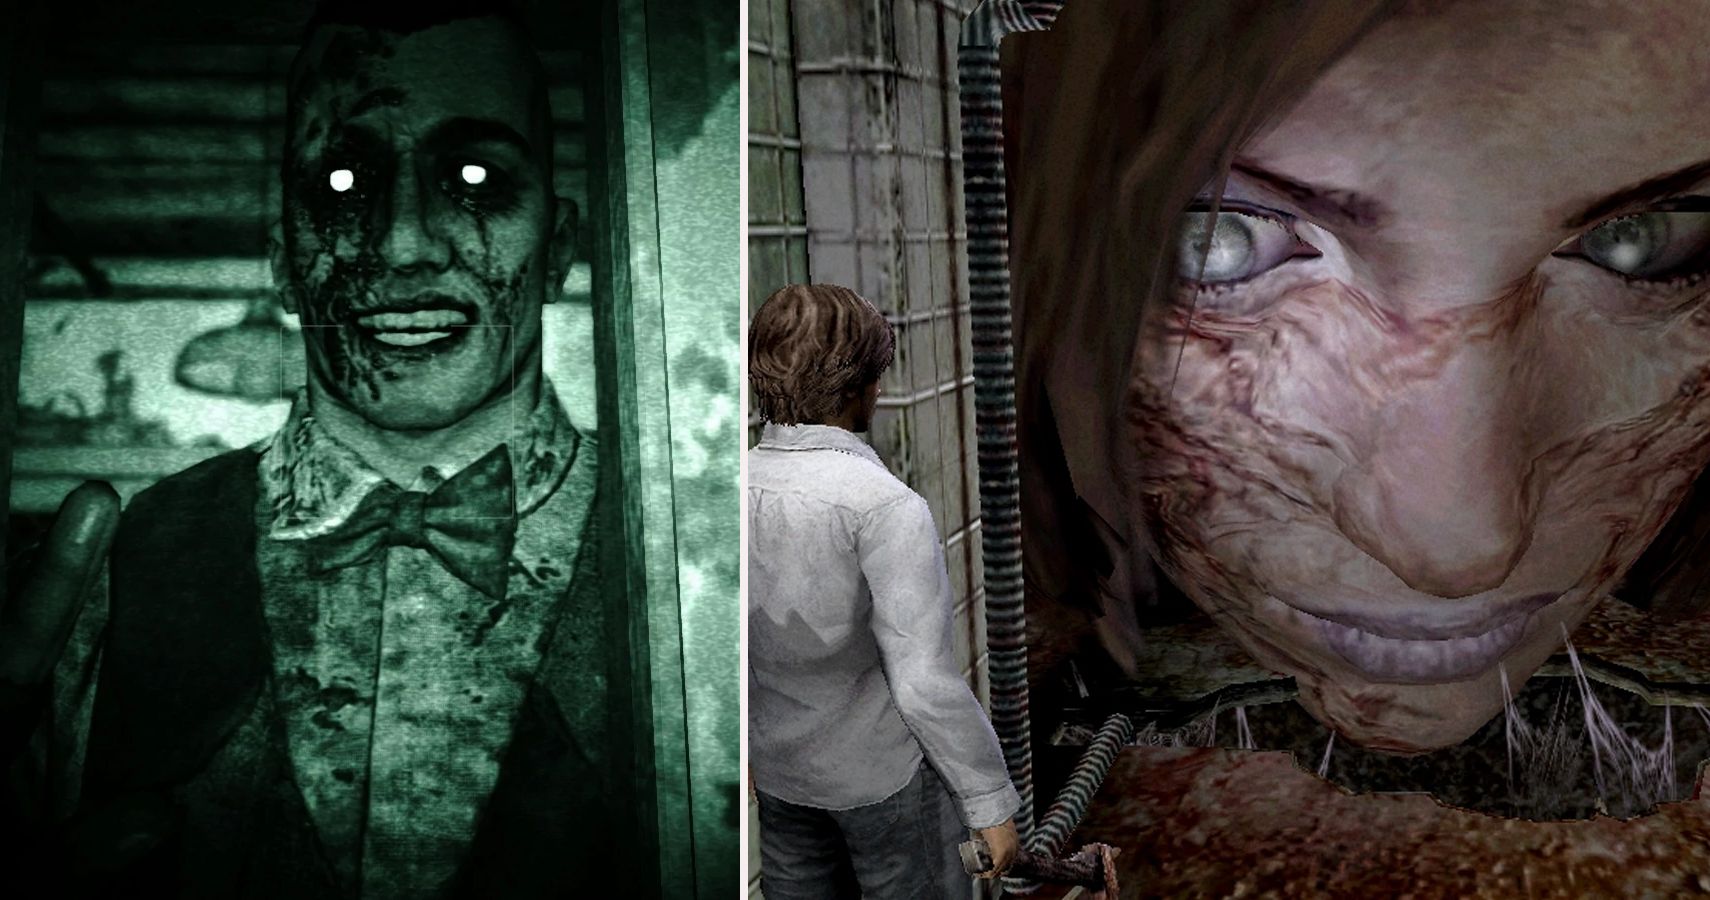 The Scariest Horror Game Pictures Of All Time